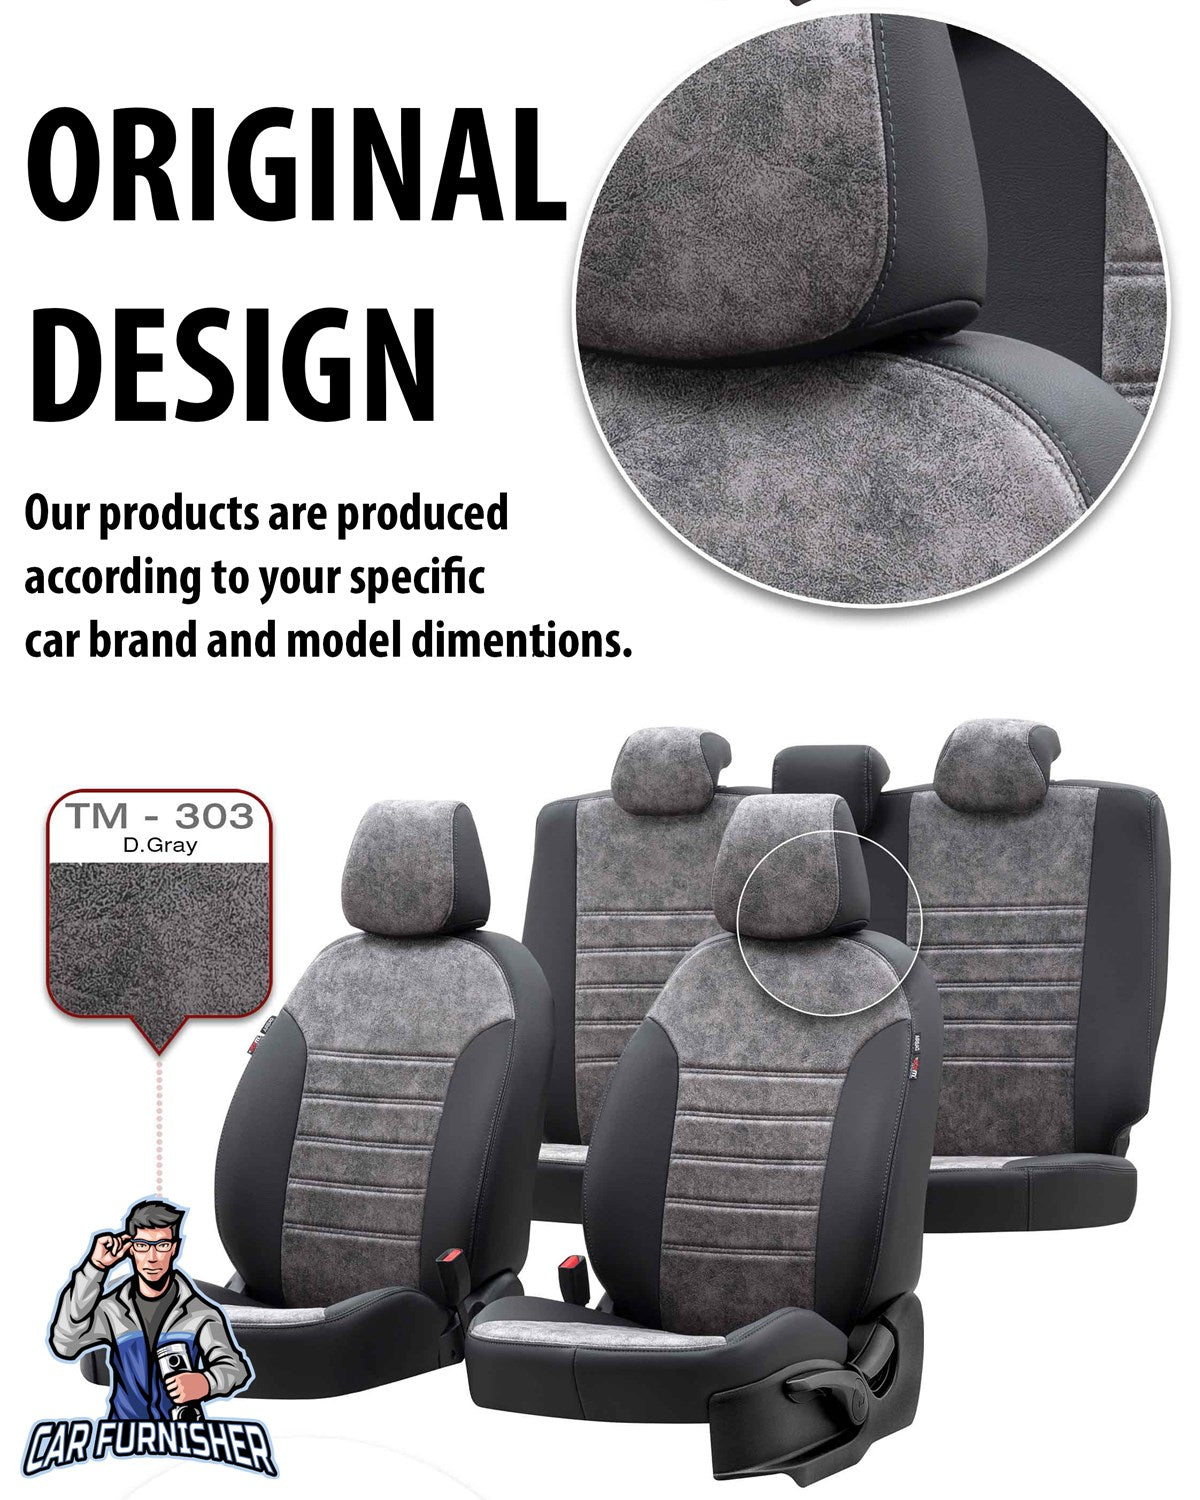 Jeep Grand Cherokee Seat Cover Milano Suede Design Black Leather & Suede Fabric